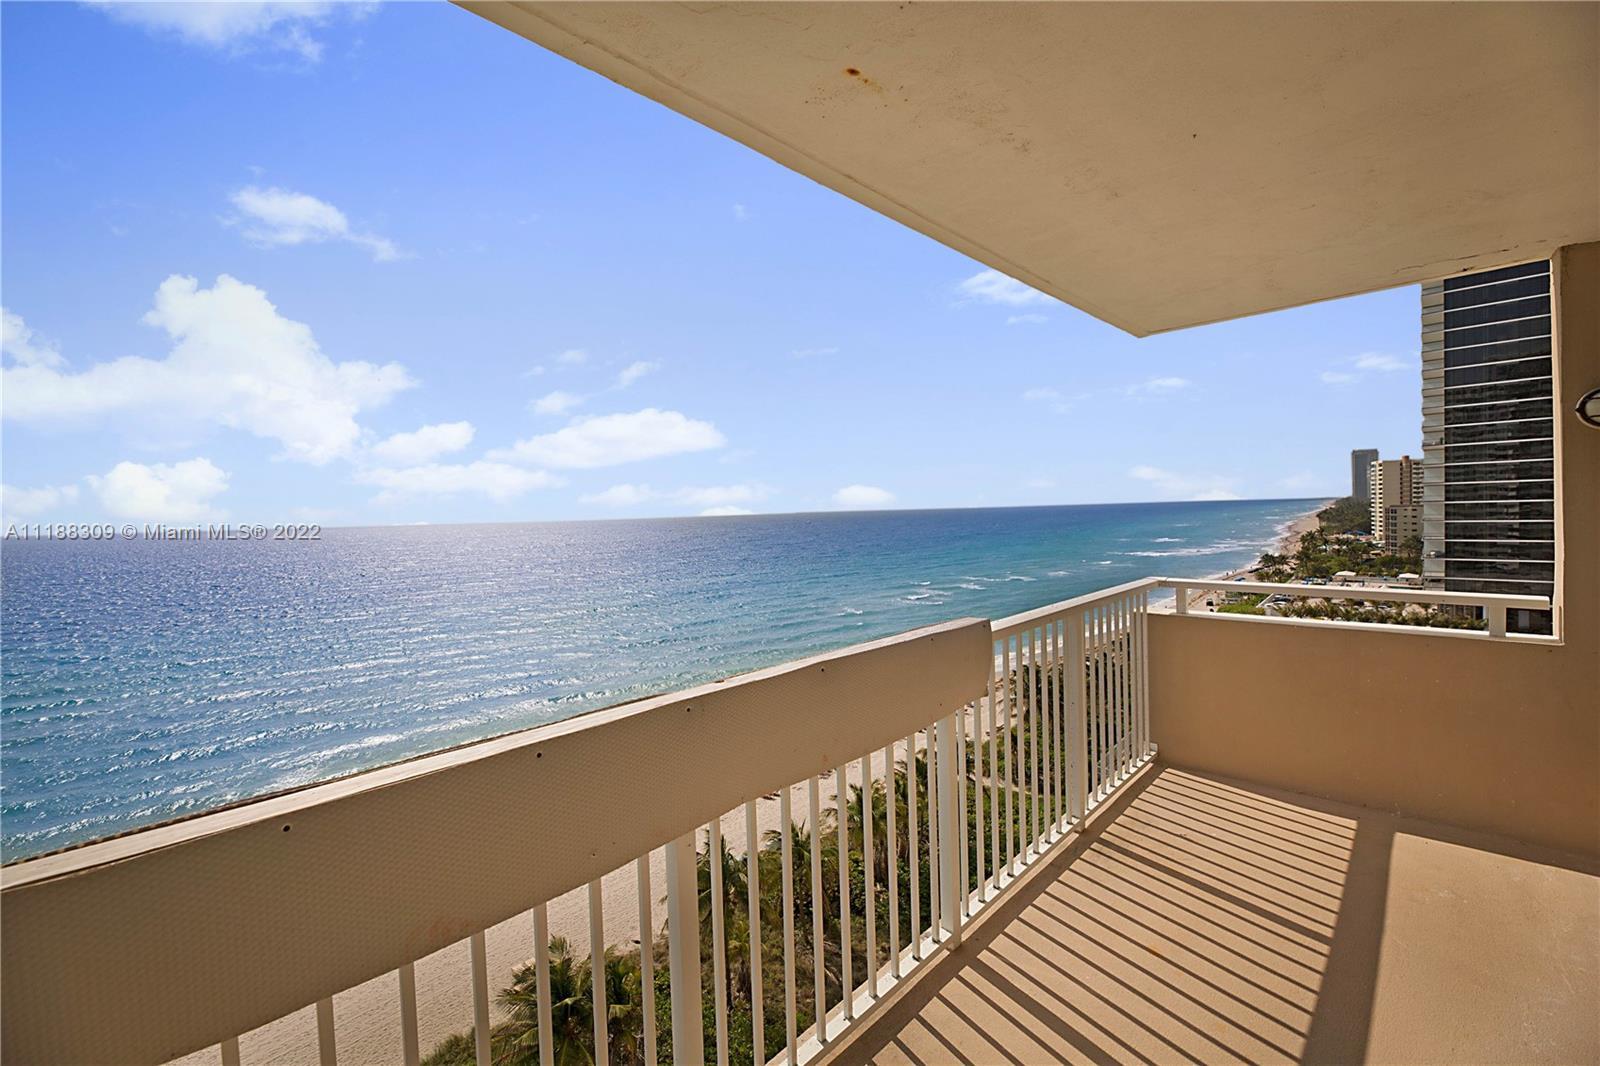 Rarely available east facing corner unit with direct captivating ocean front views that can be seen 